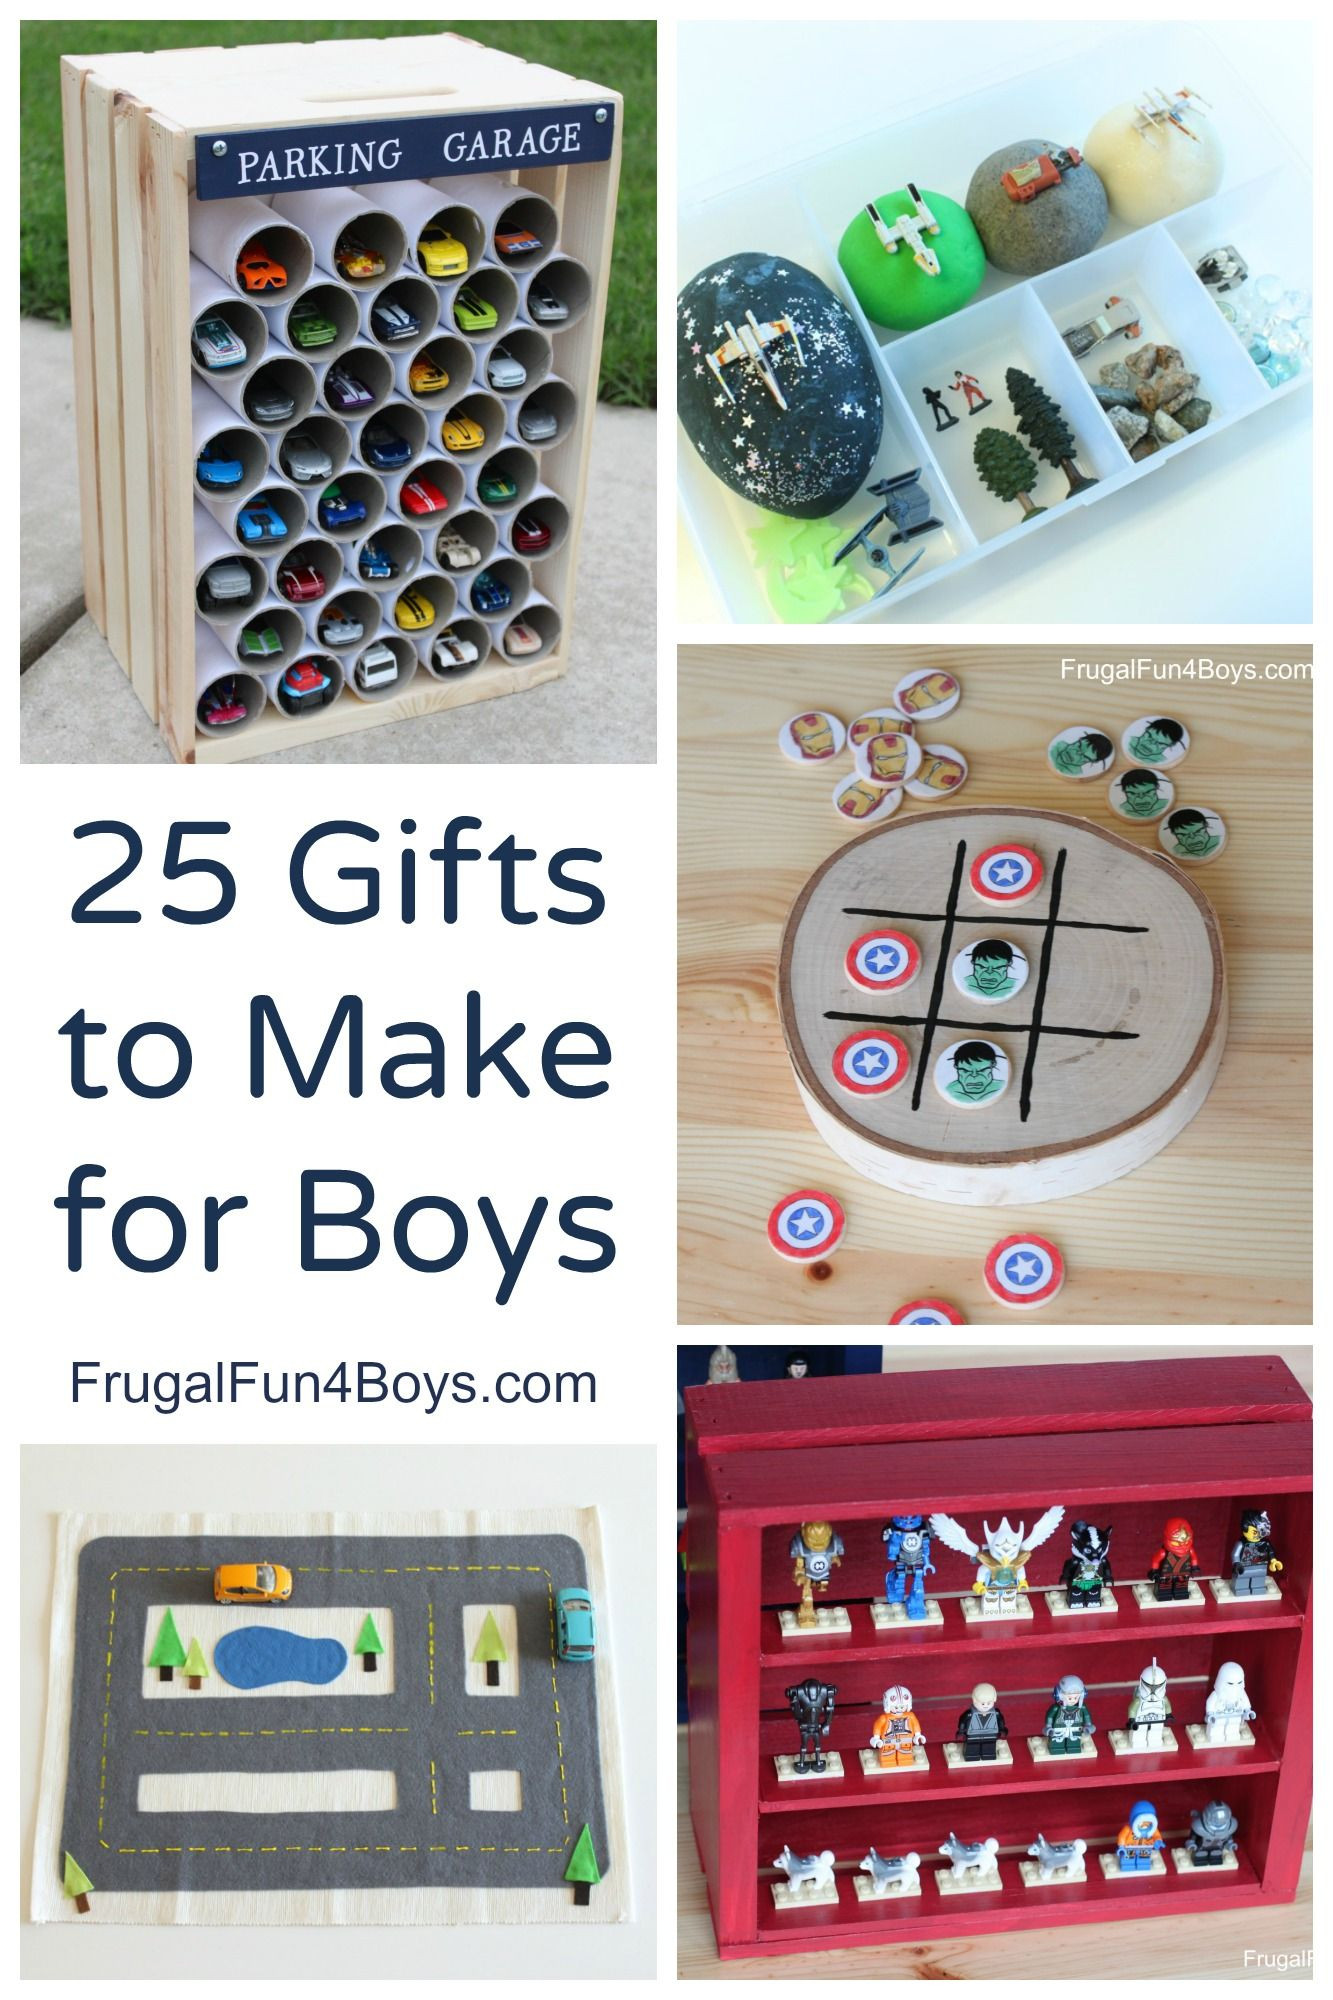 Toddler Gift Ideas For Boys
 25 More Homemade Gifts to Make for Boys